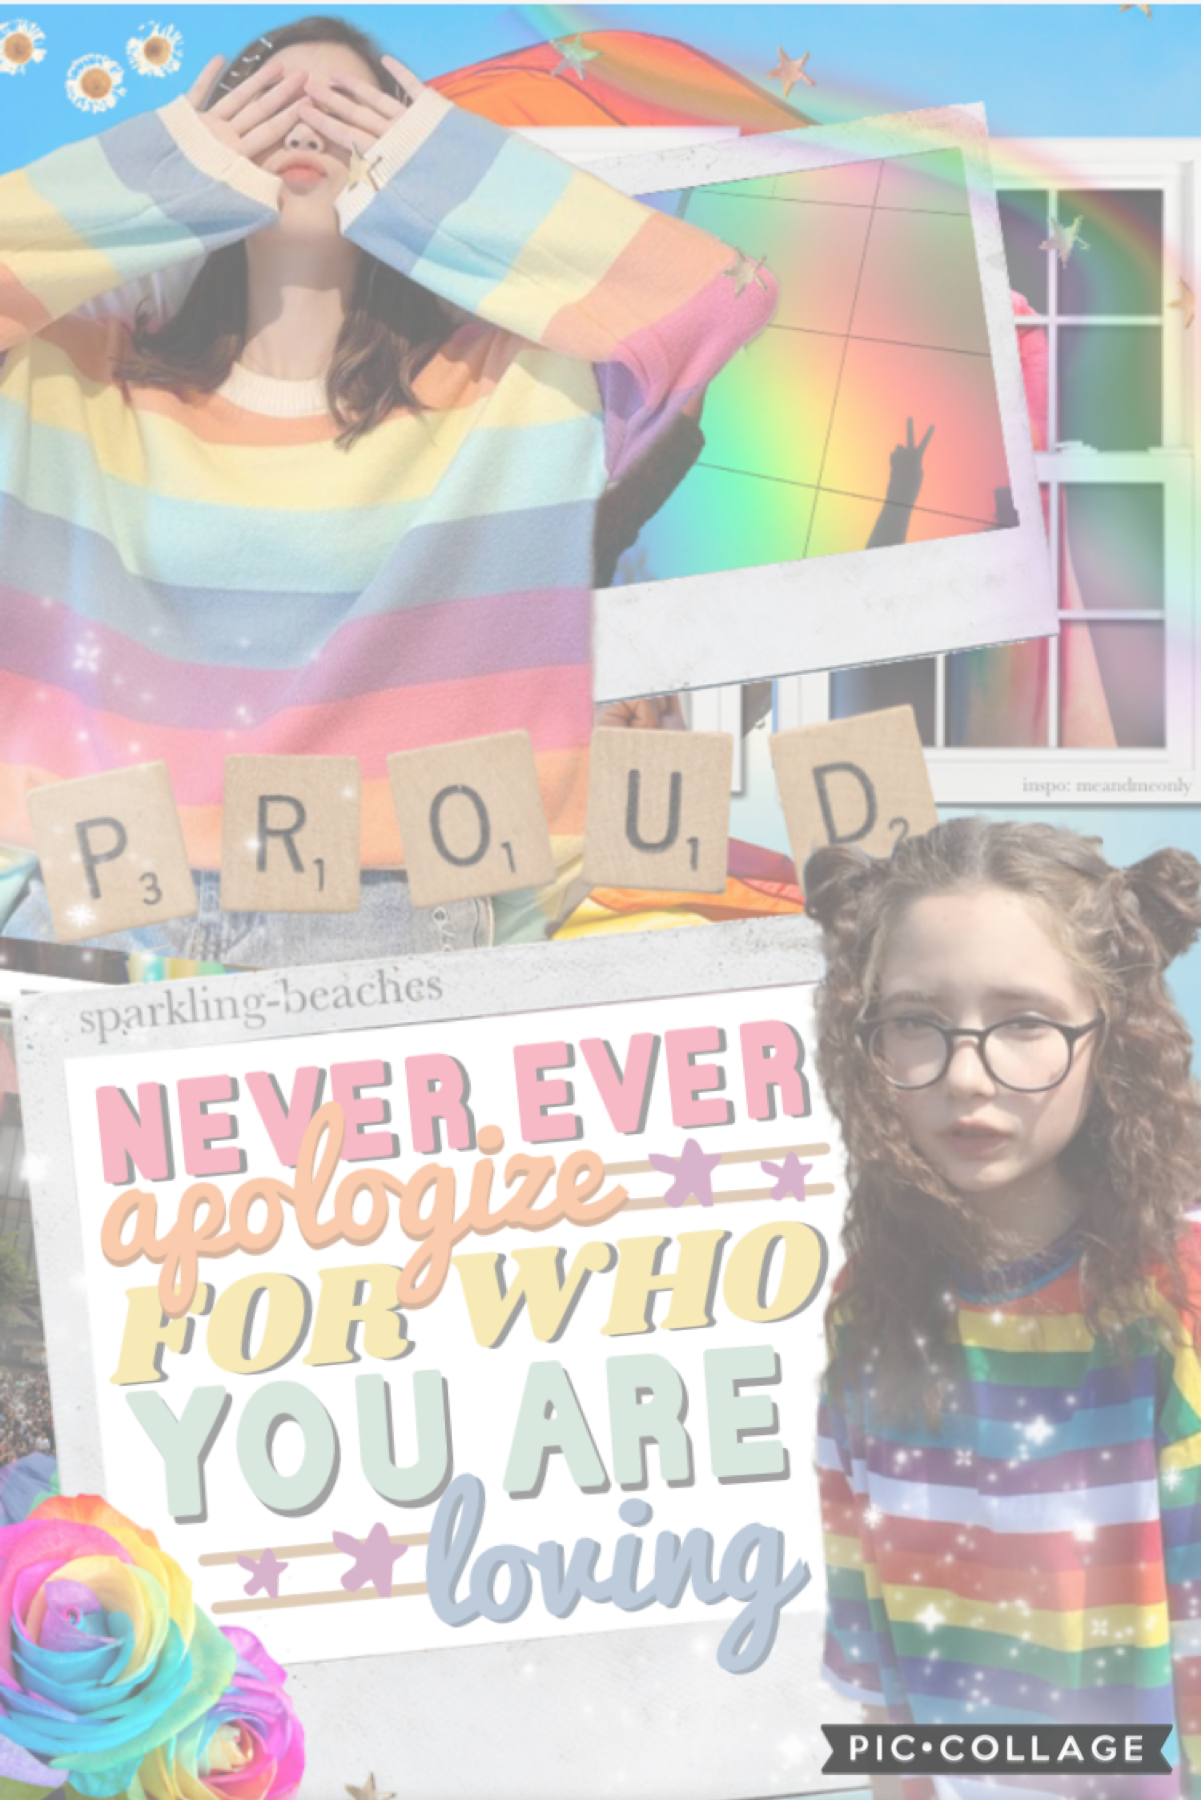 6•13•22 || 🏳️‍🌈💓 happy pride month! 💕 to every member of the lgbtq community: we love you, we support you, and embrace who you are, even if you’re not out of the closet yet. | BE PROUD. 🏳️‍⚧️ 🏳️‍🌈 ❤️ | love, hannah 💗 